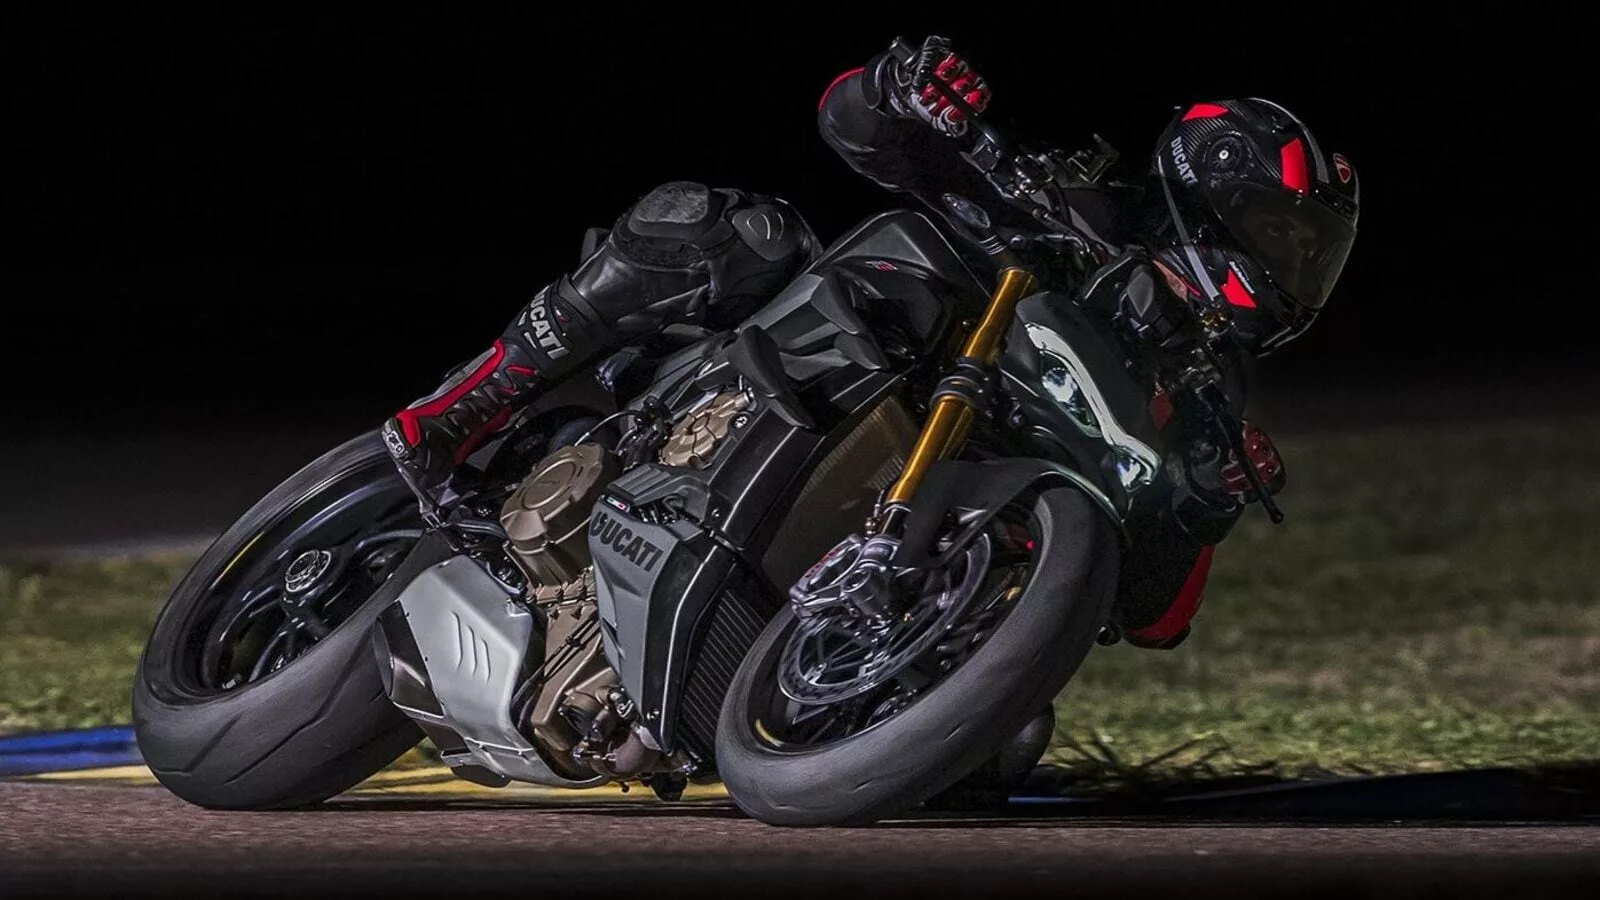 Ducati Streetfighter V4 and V4 S launched in India